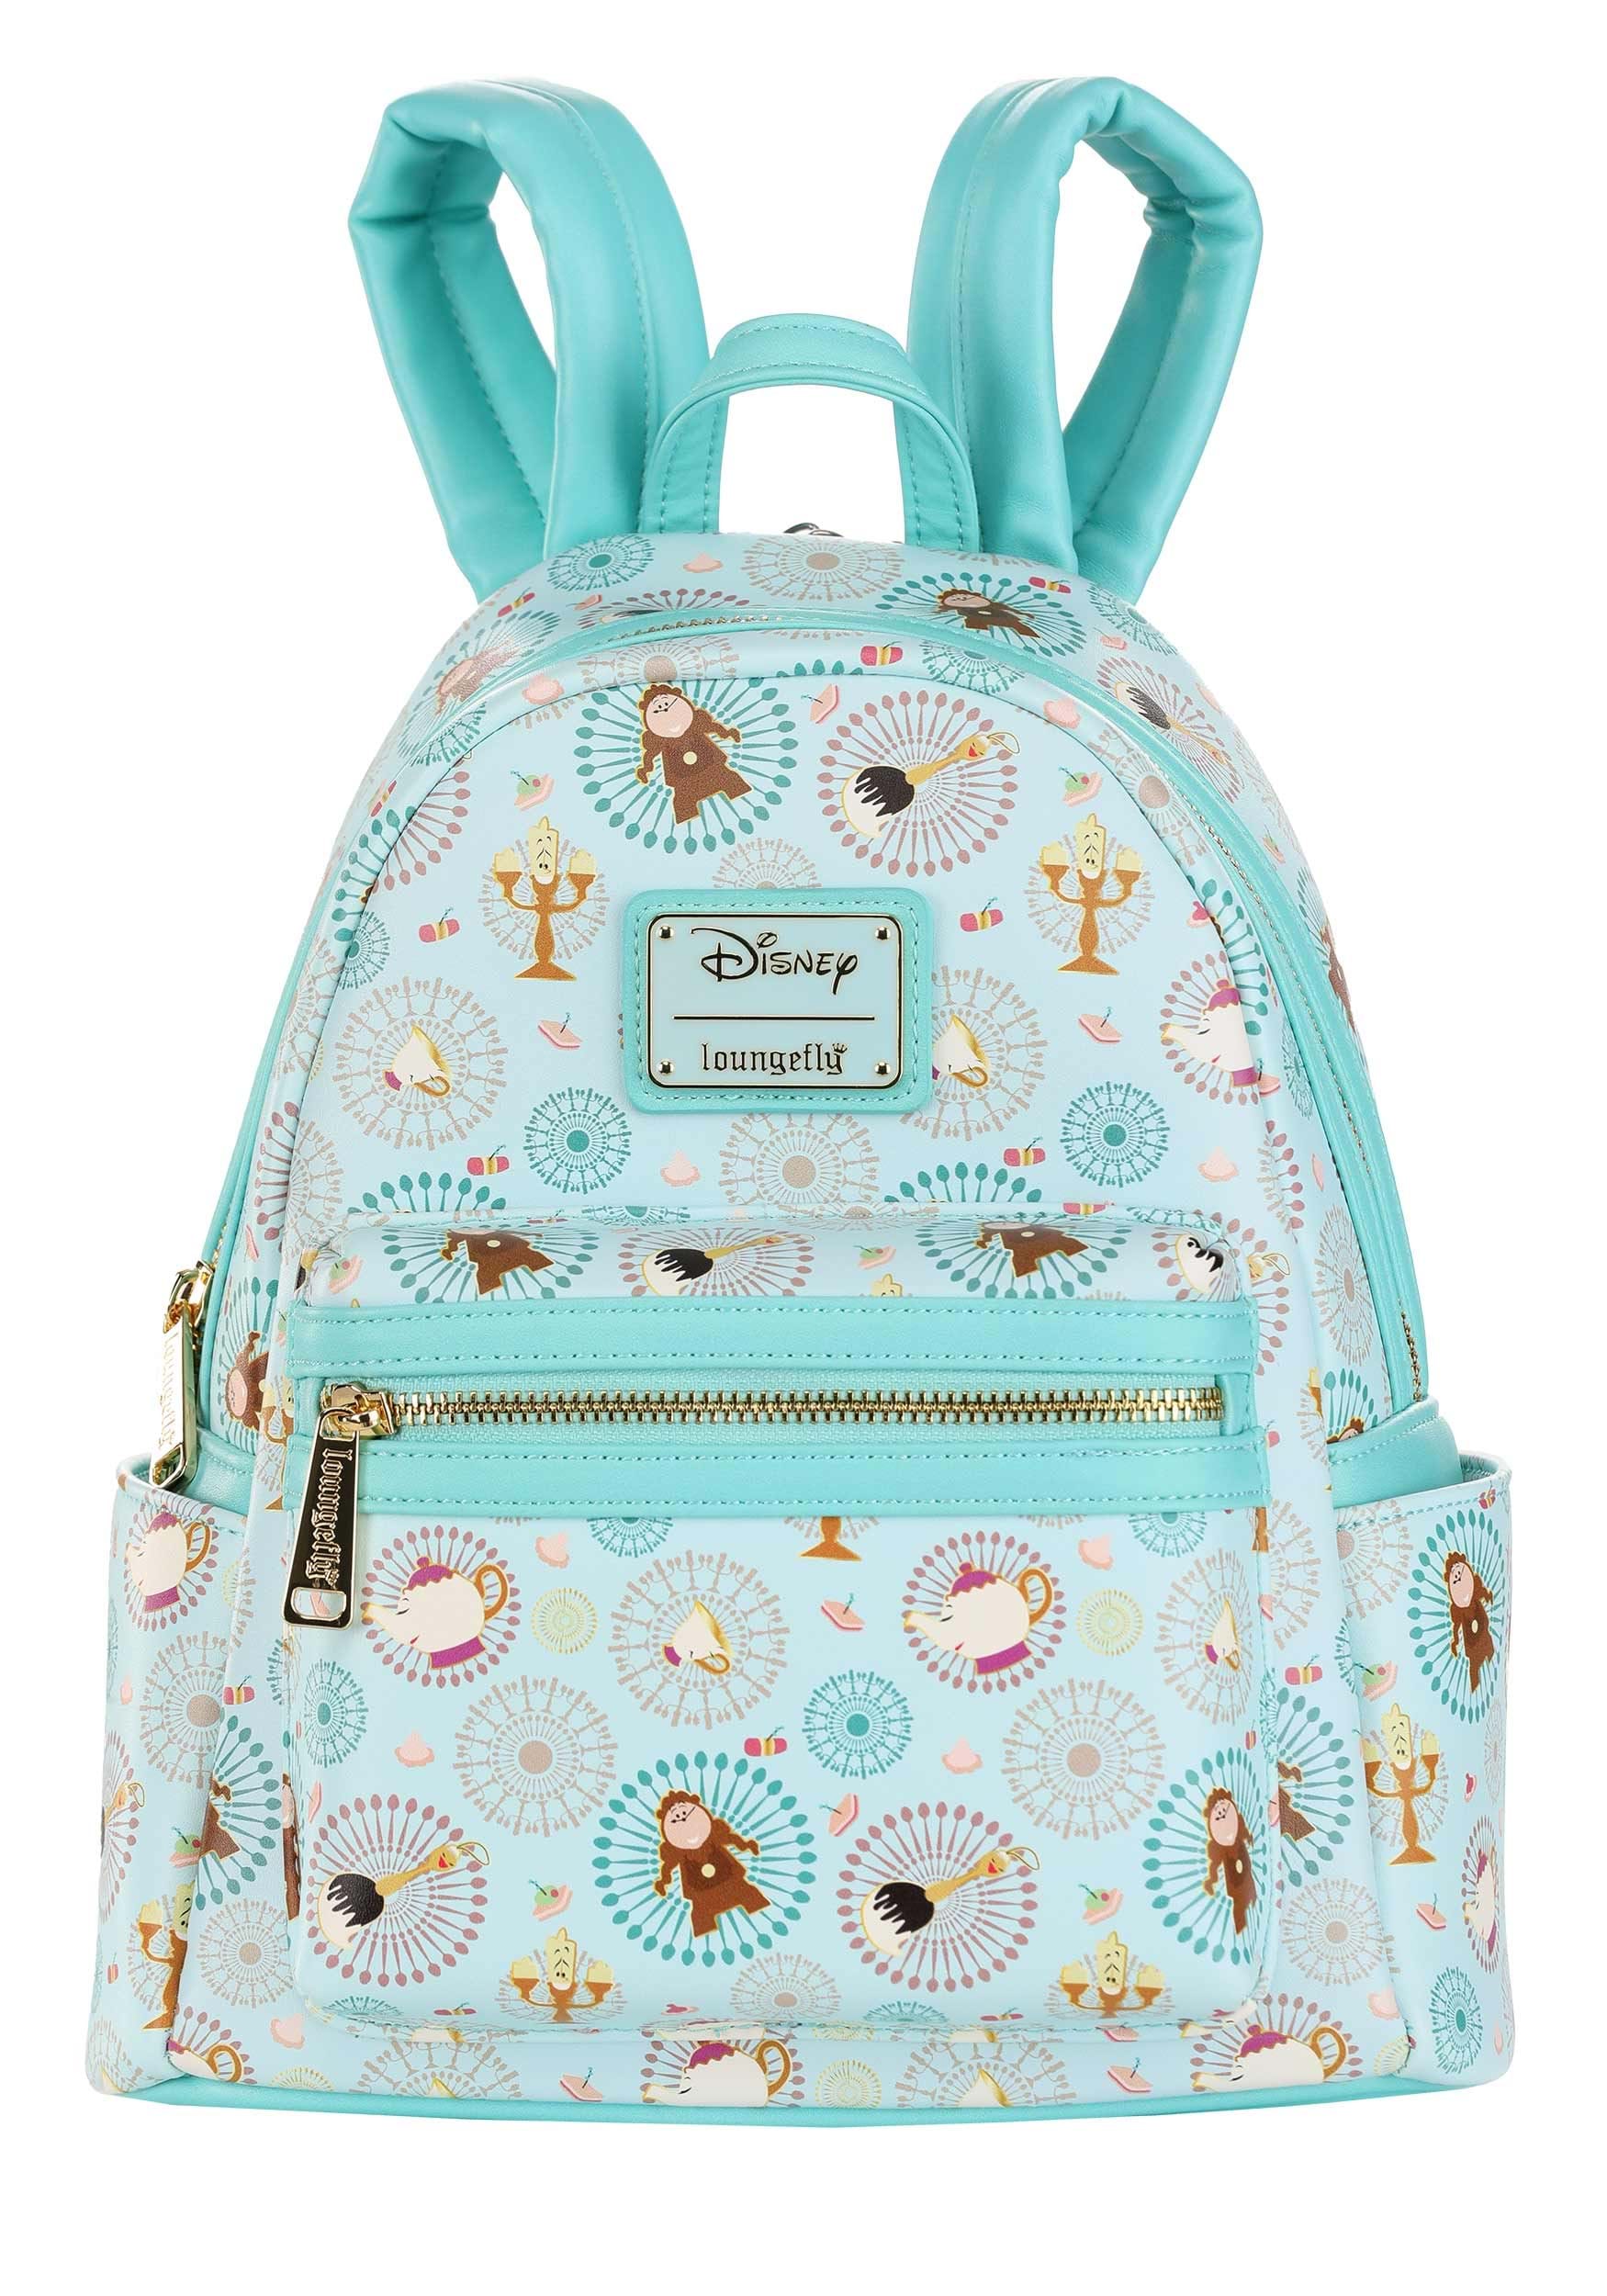 Beauty and the Beast Be Our Guest Mini Backpack by Loungefly | Exclusive Bags